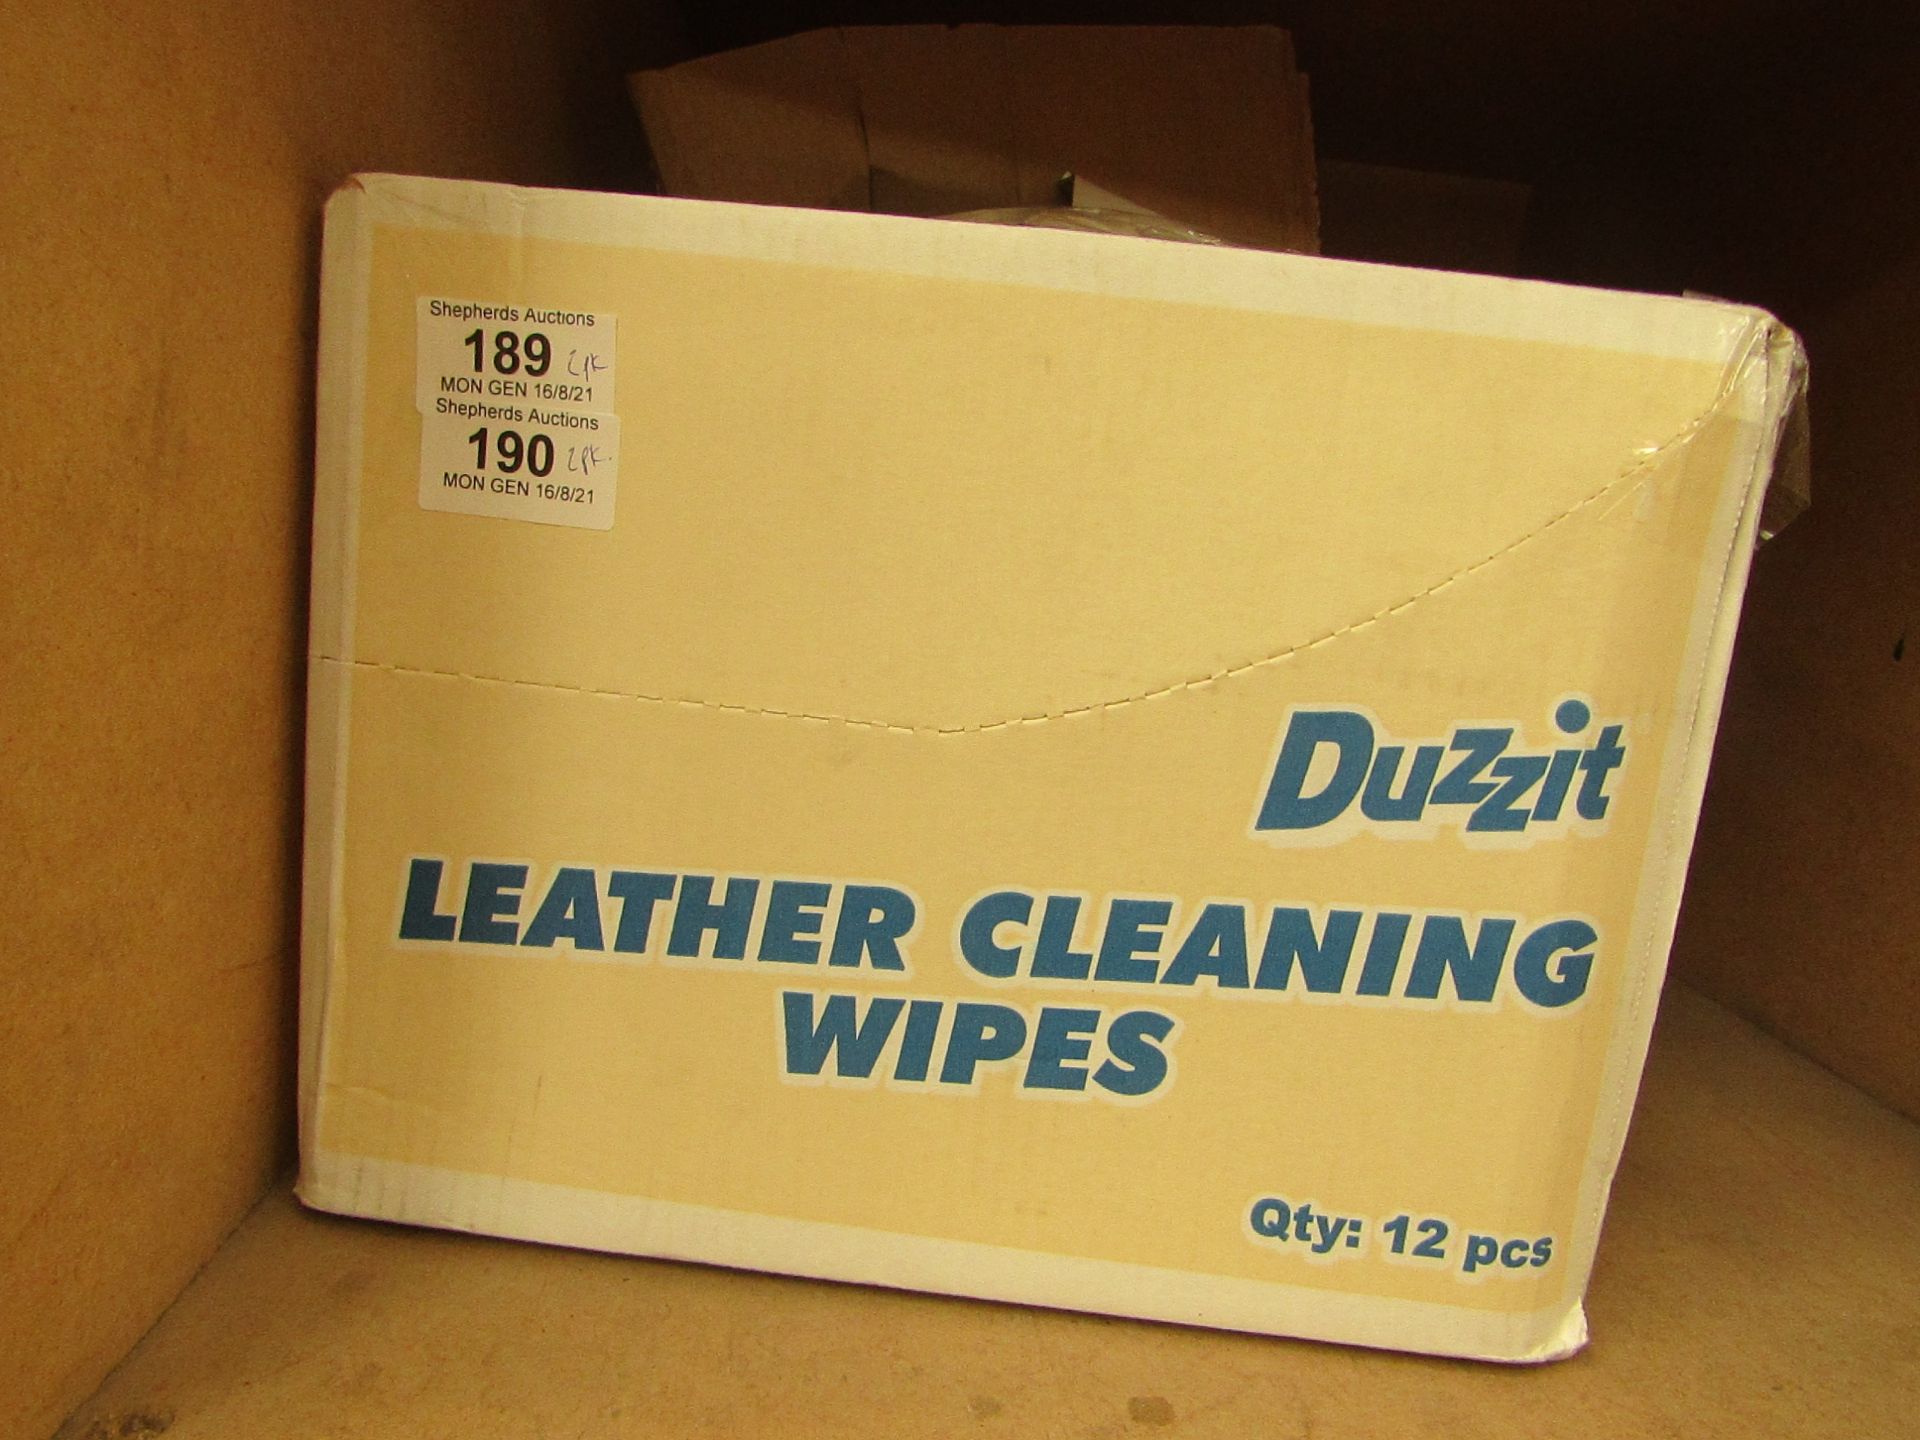 2x Packs of 50 Duzzit Leather Cleaning Wipes - New & Packaged.